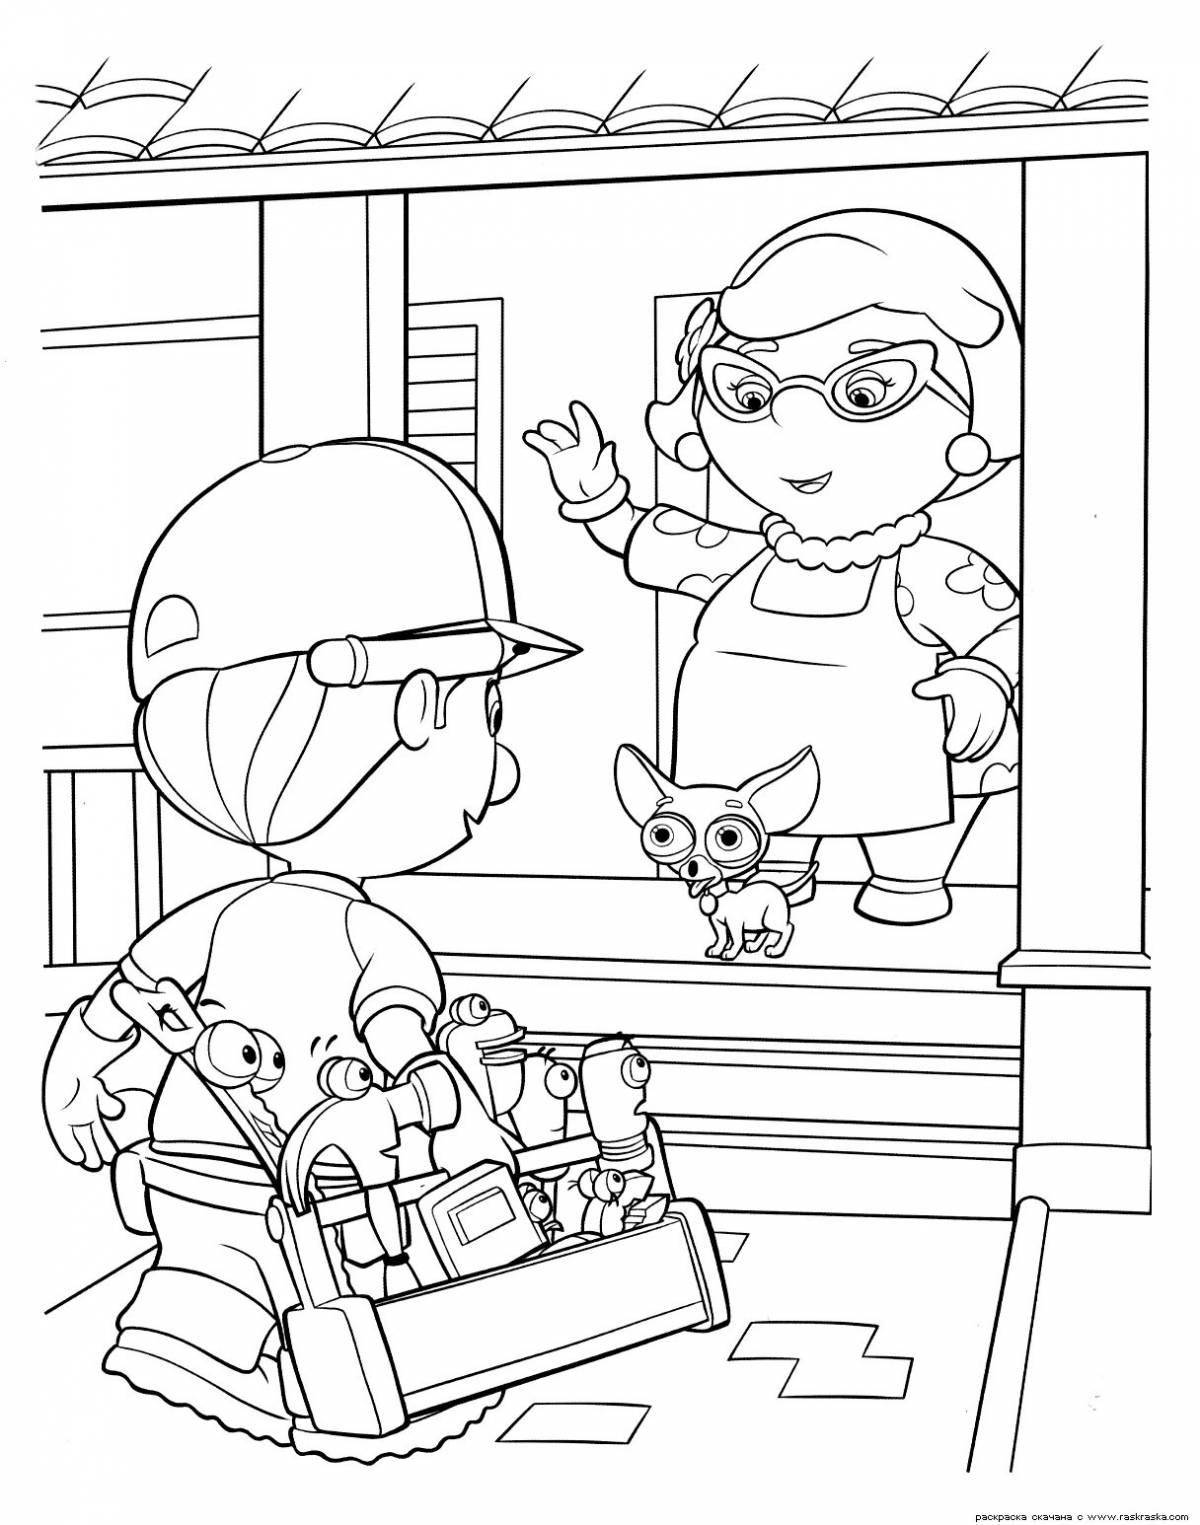 Coloring page mysterious gear